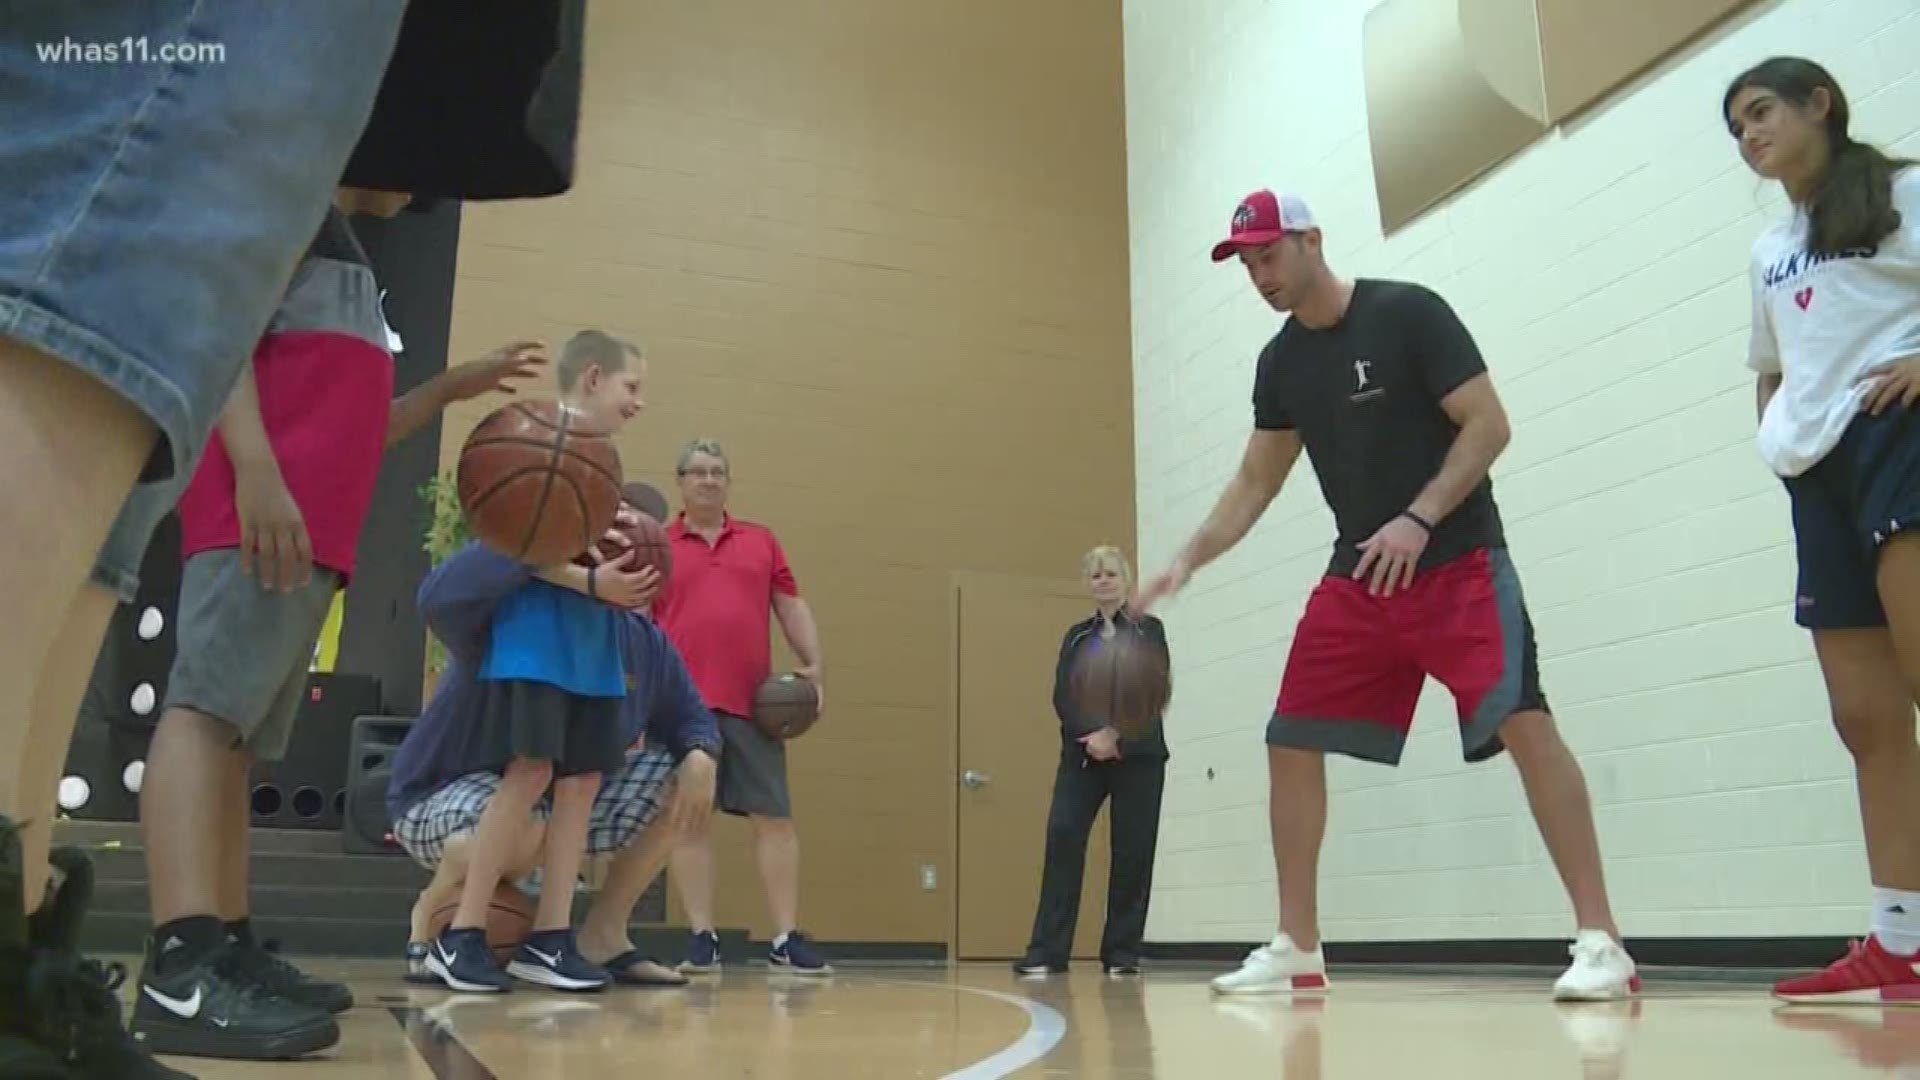 Former Cardinal Luke Hancock hosted his third annual basketball camp for for children with autism. The clinic, co-hosted by FEAT, or Families for Effective Autism Treatment, teaches the fundamentals of the game, but also helps with socialization for these youngsters.